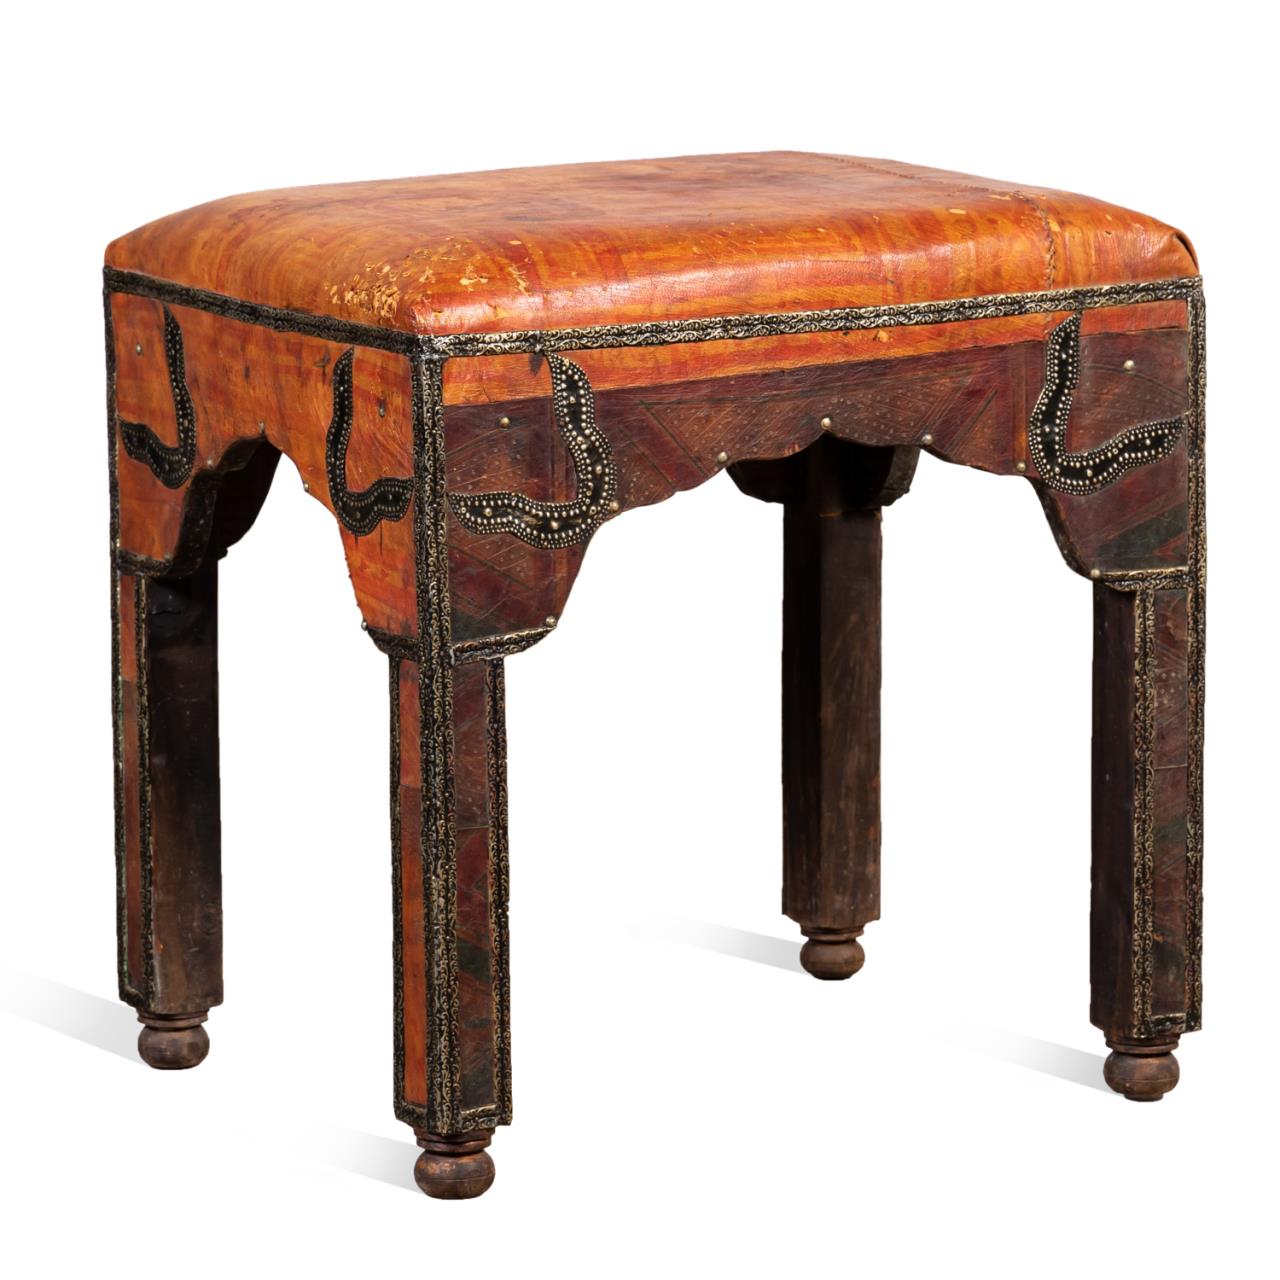 MOROCCAN STOOL WITH TUAREG LEATHER 29f8a8